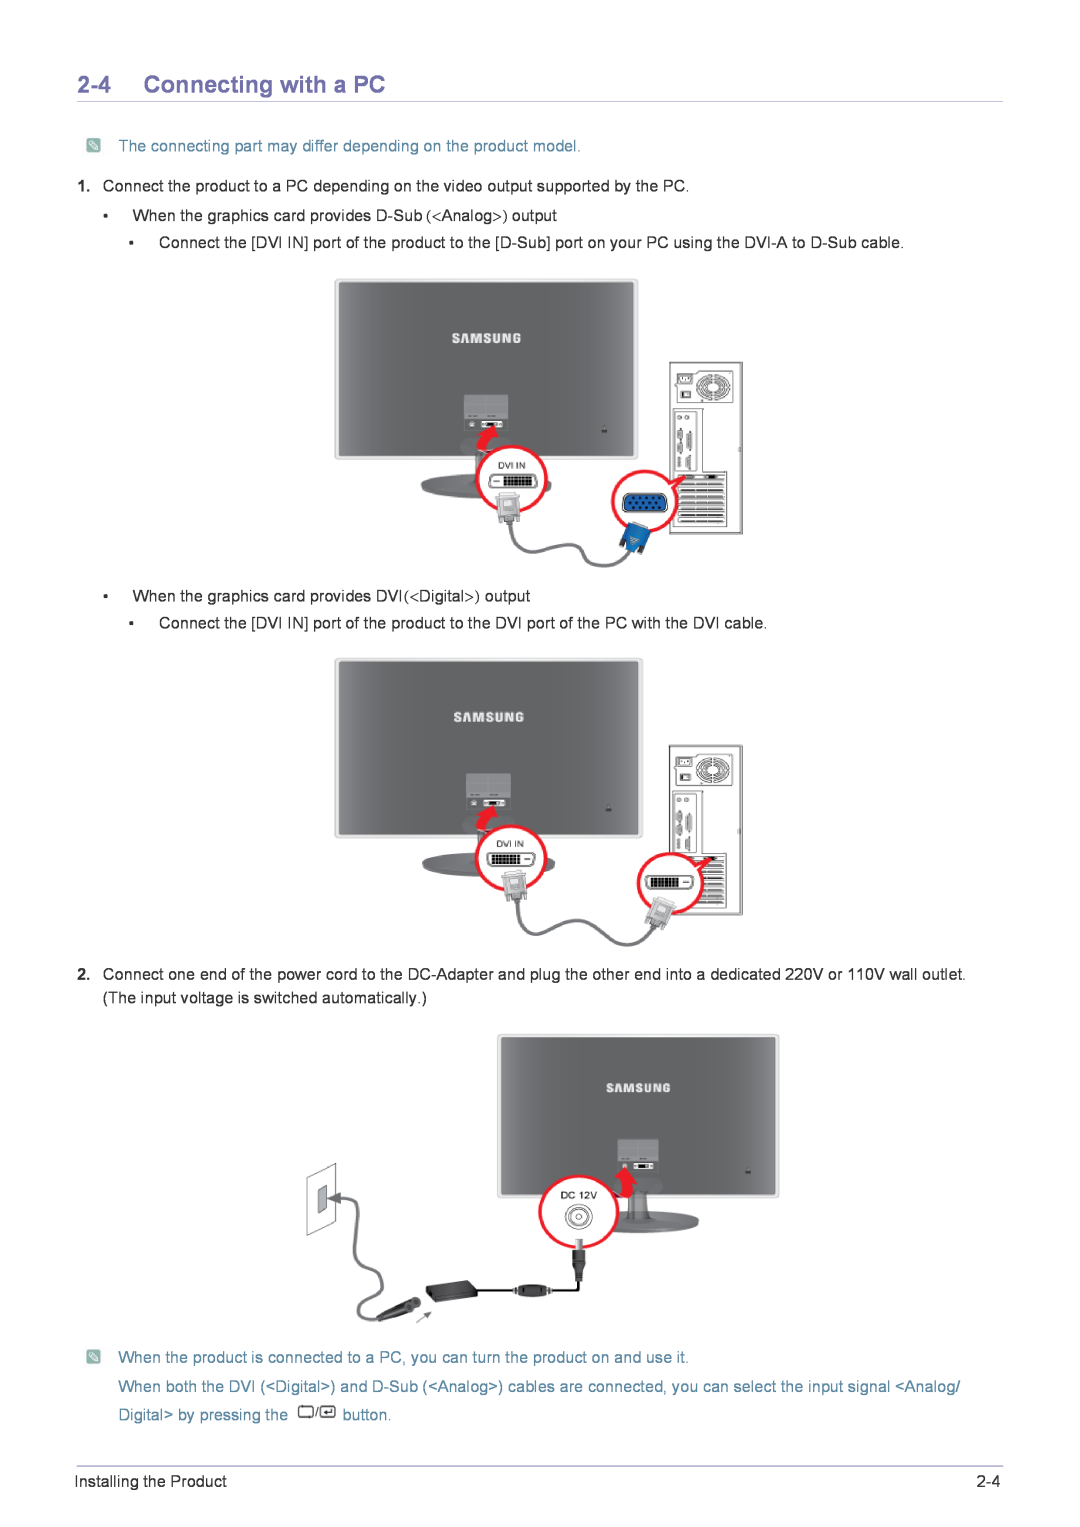 Samsung XL2270 user manual Connecting with a PC, The connecting part may differ depending on the product model 